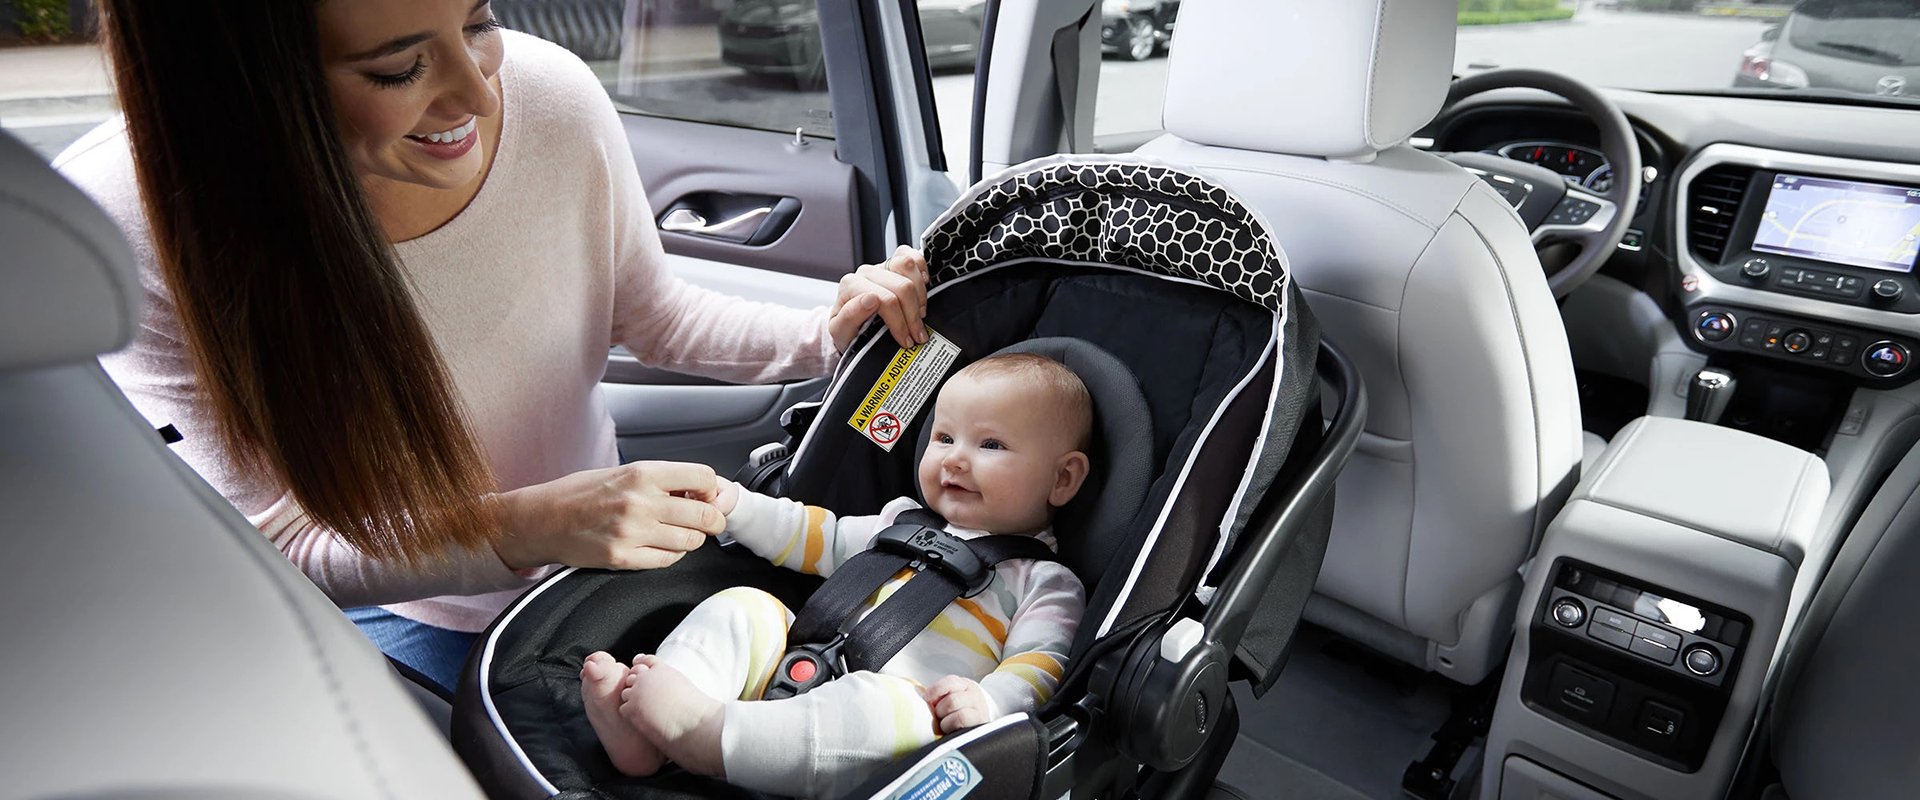 Free Infant Car Seats in All 50 States - Kid Travel